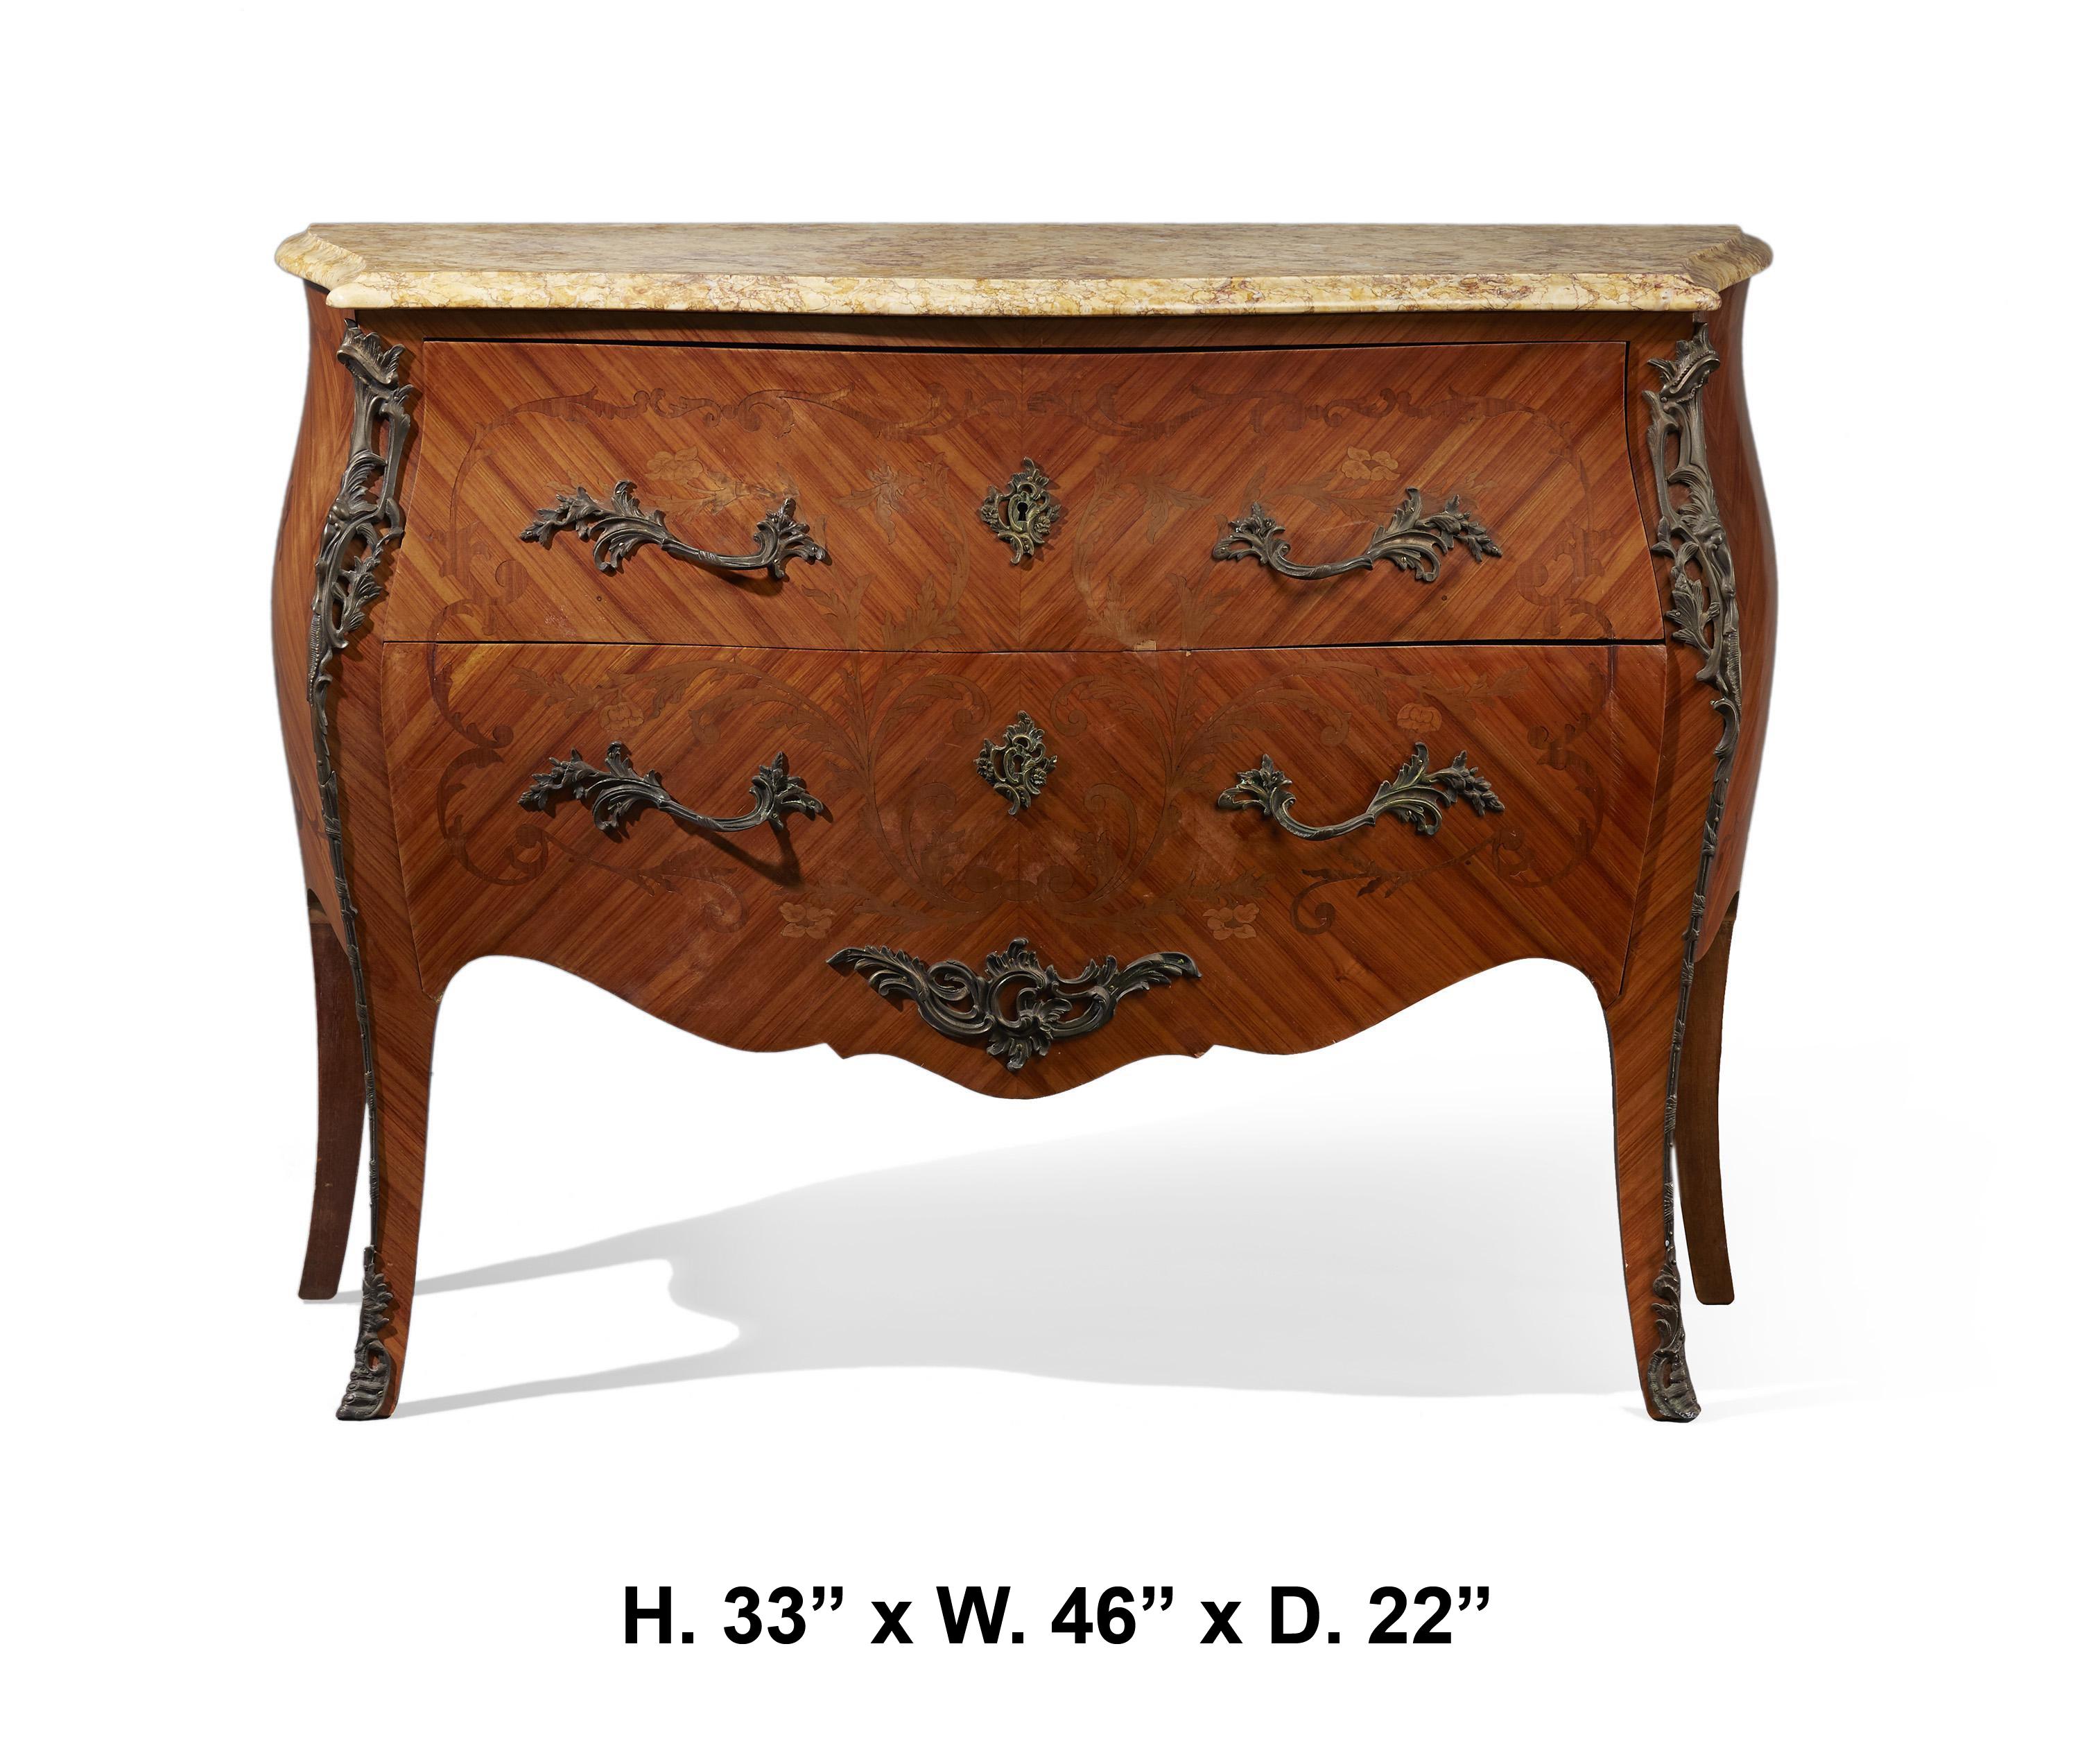 Beautiful French Louis XV Style commode with marble top, early 20th century.
The moulded serpentine-shaped mottled marble top, is over two marquetry veneered long drawers mounted with foliate inspired handles and escutcheons, the corners are bronze